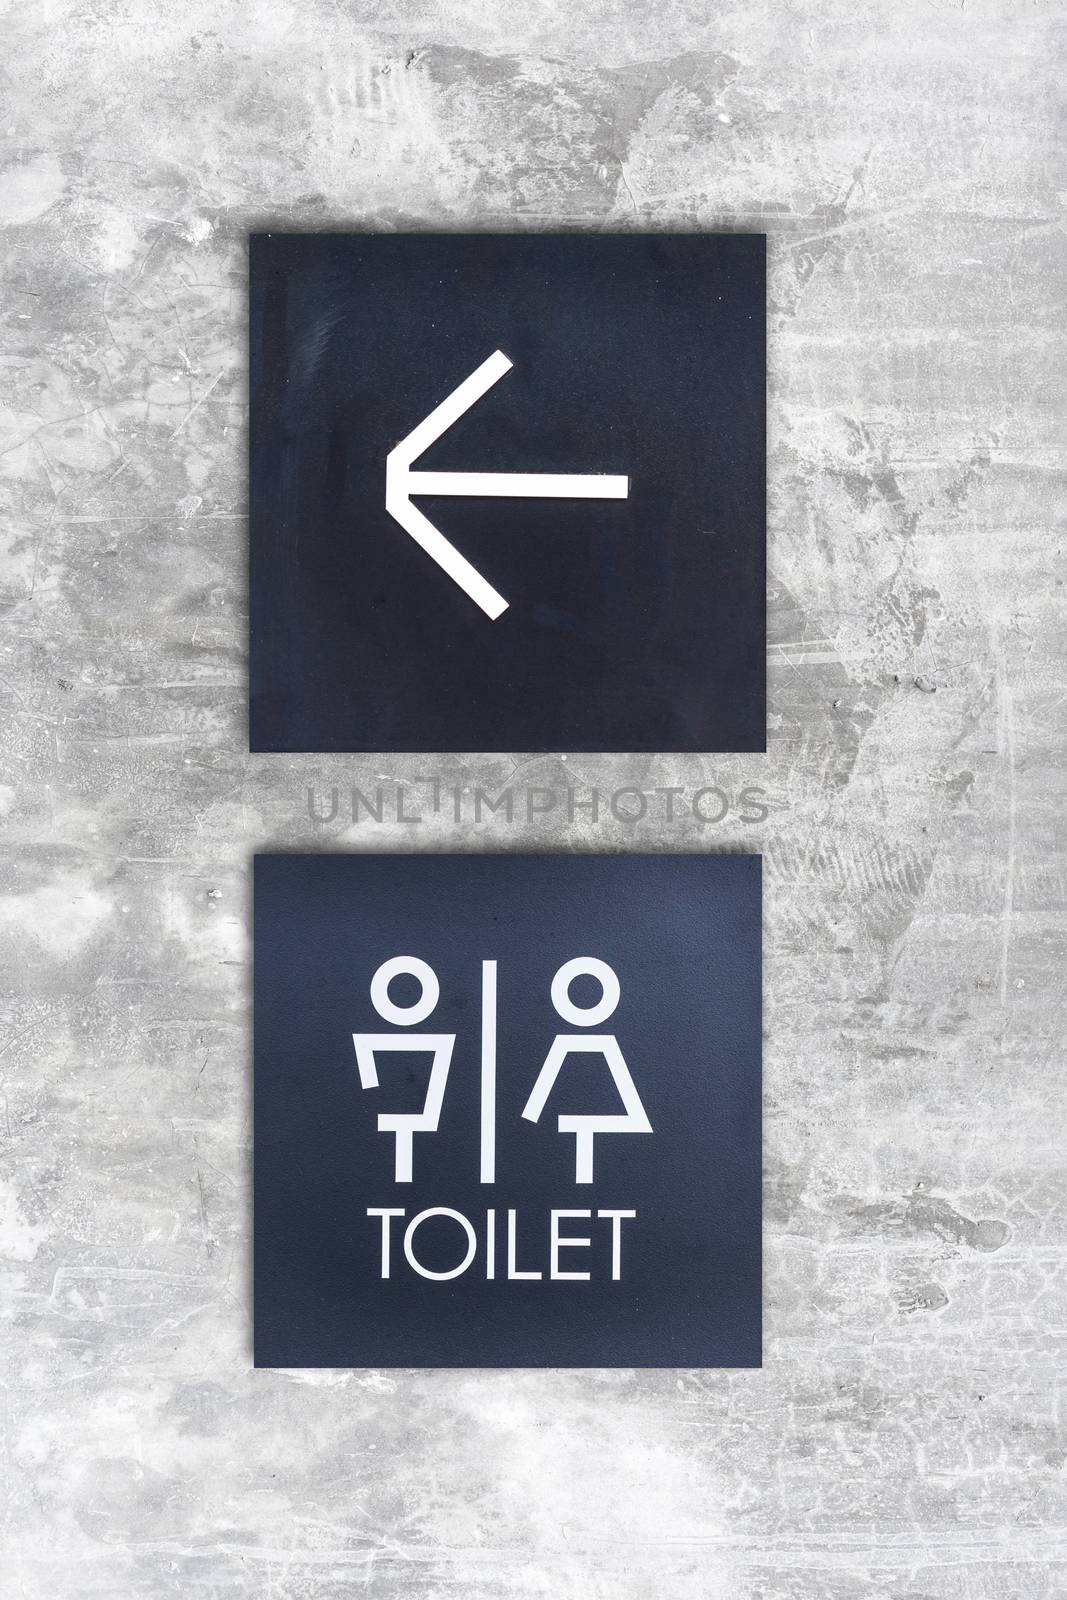 Unisex restroom or Toilet and arrow sign on concrete wall style boutique